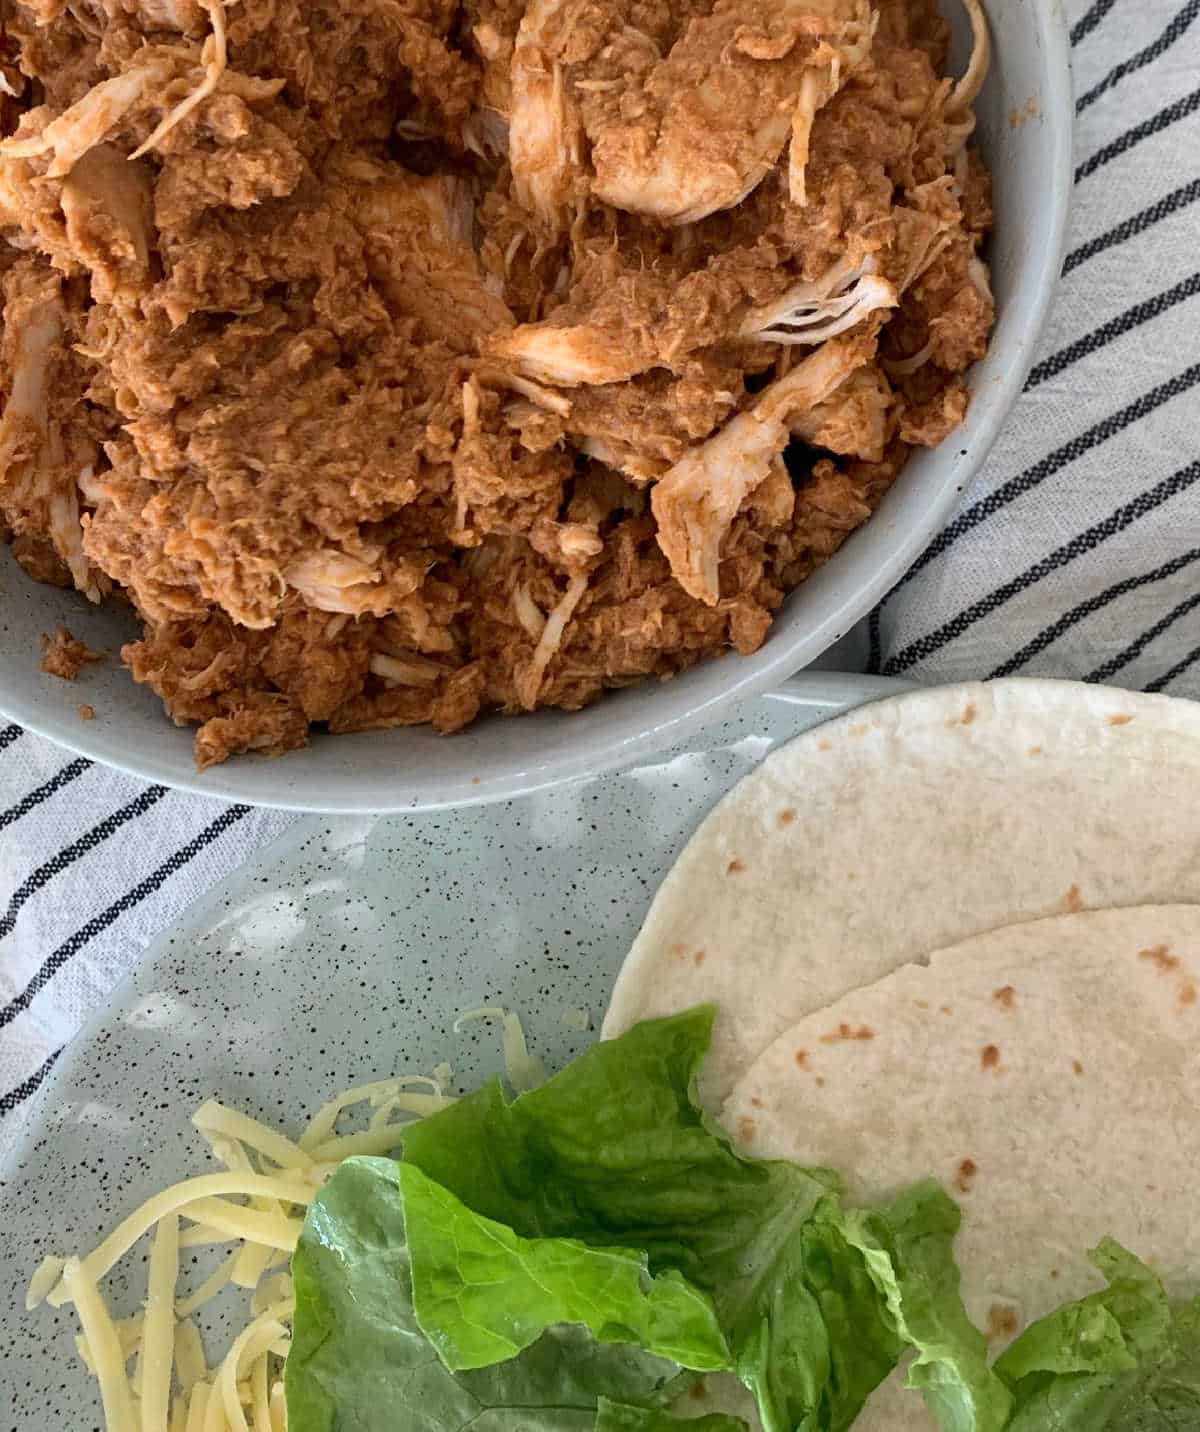 Shredded mexican chicken in a green speckled bowl next to a plate with tortillas, lettuce and cheese.